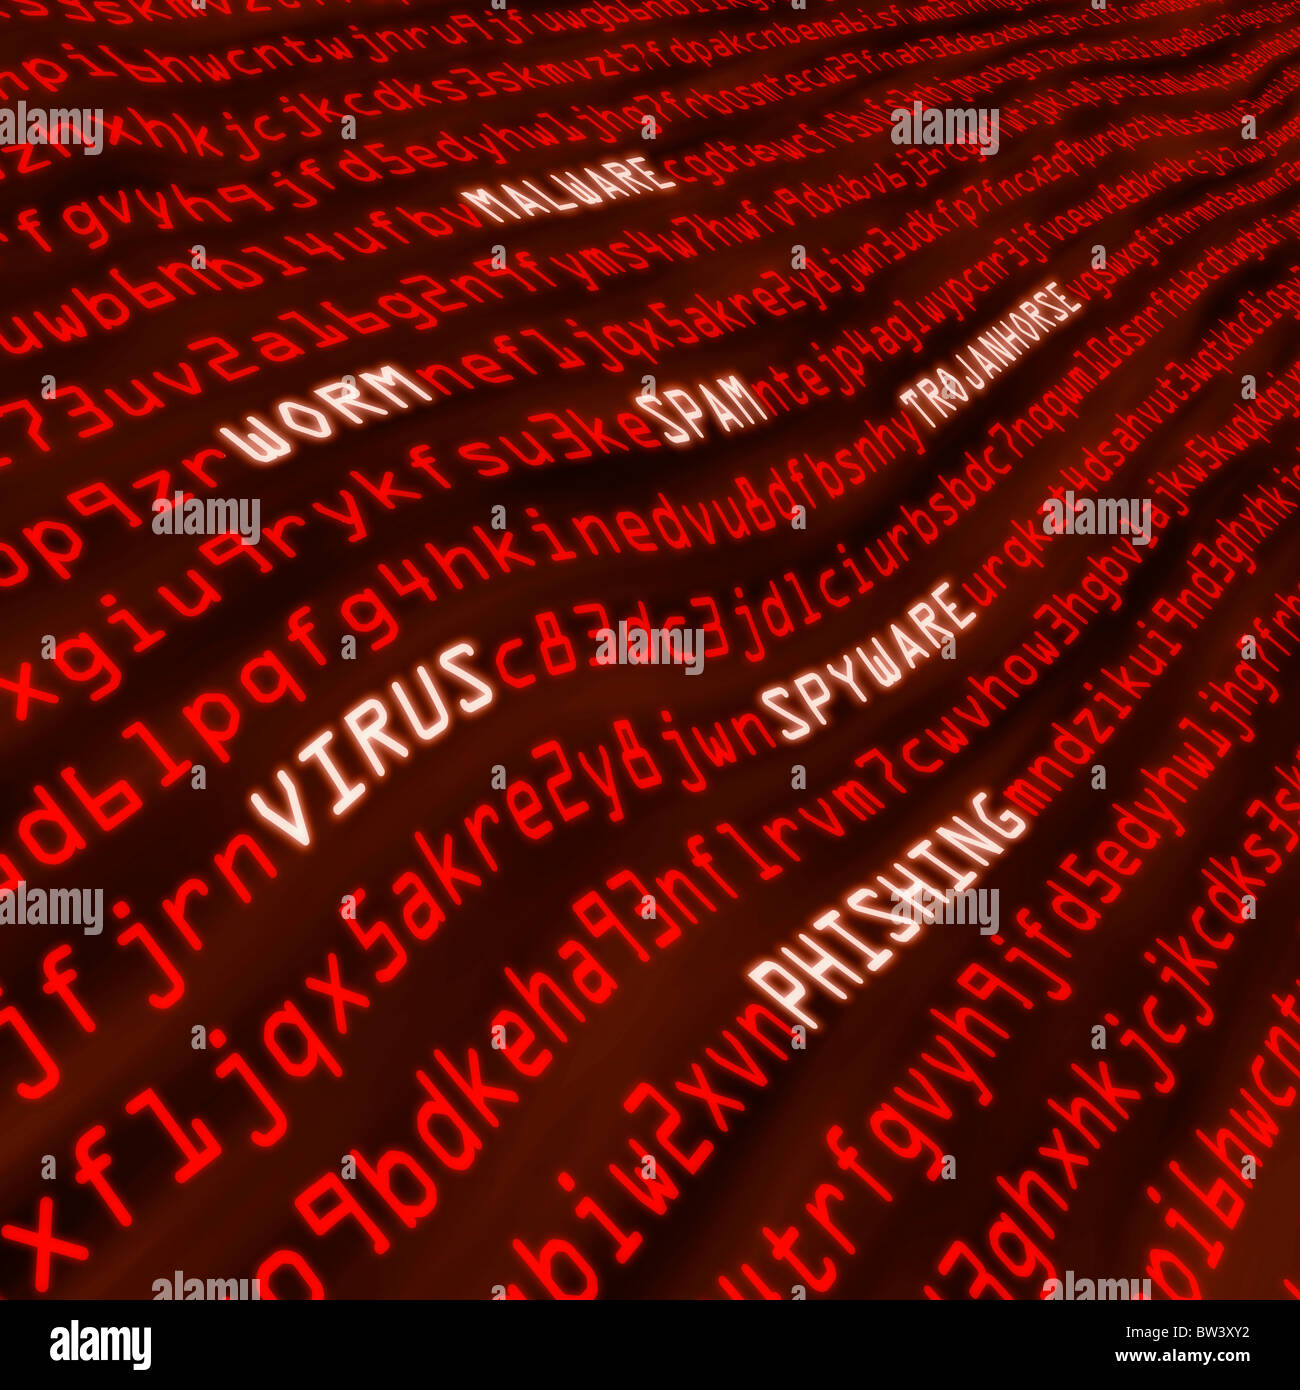 Methods of cyber attack including virus, worm, trohan horse, malware and spyware in red computer machine code Stock Photo